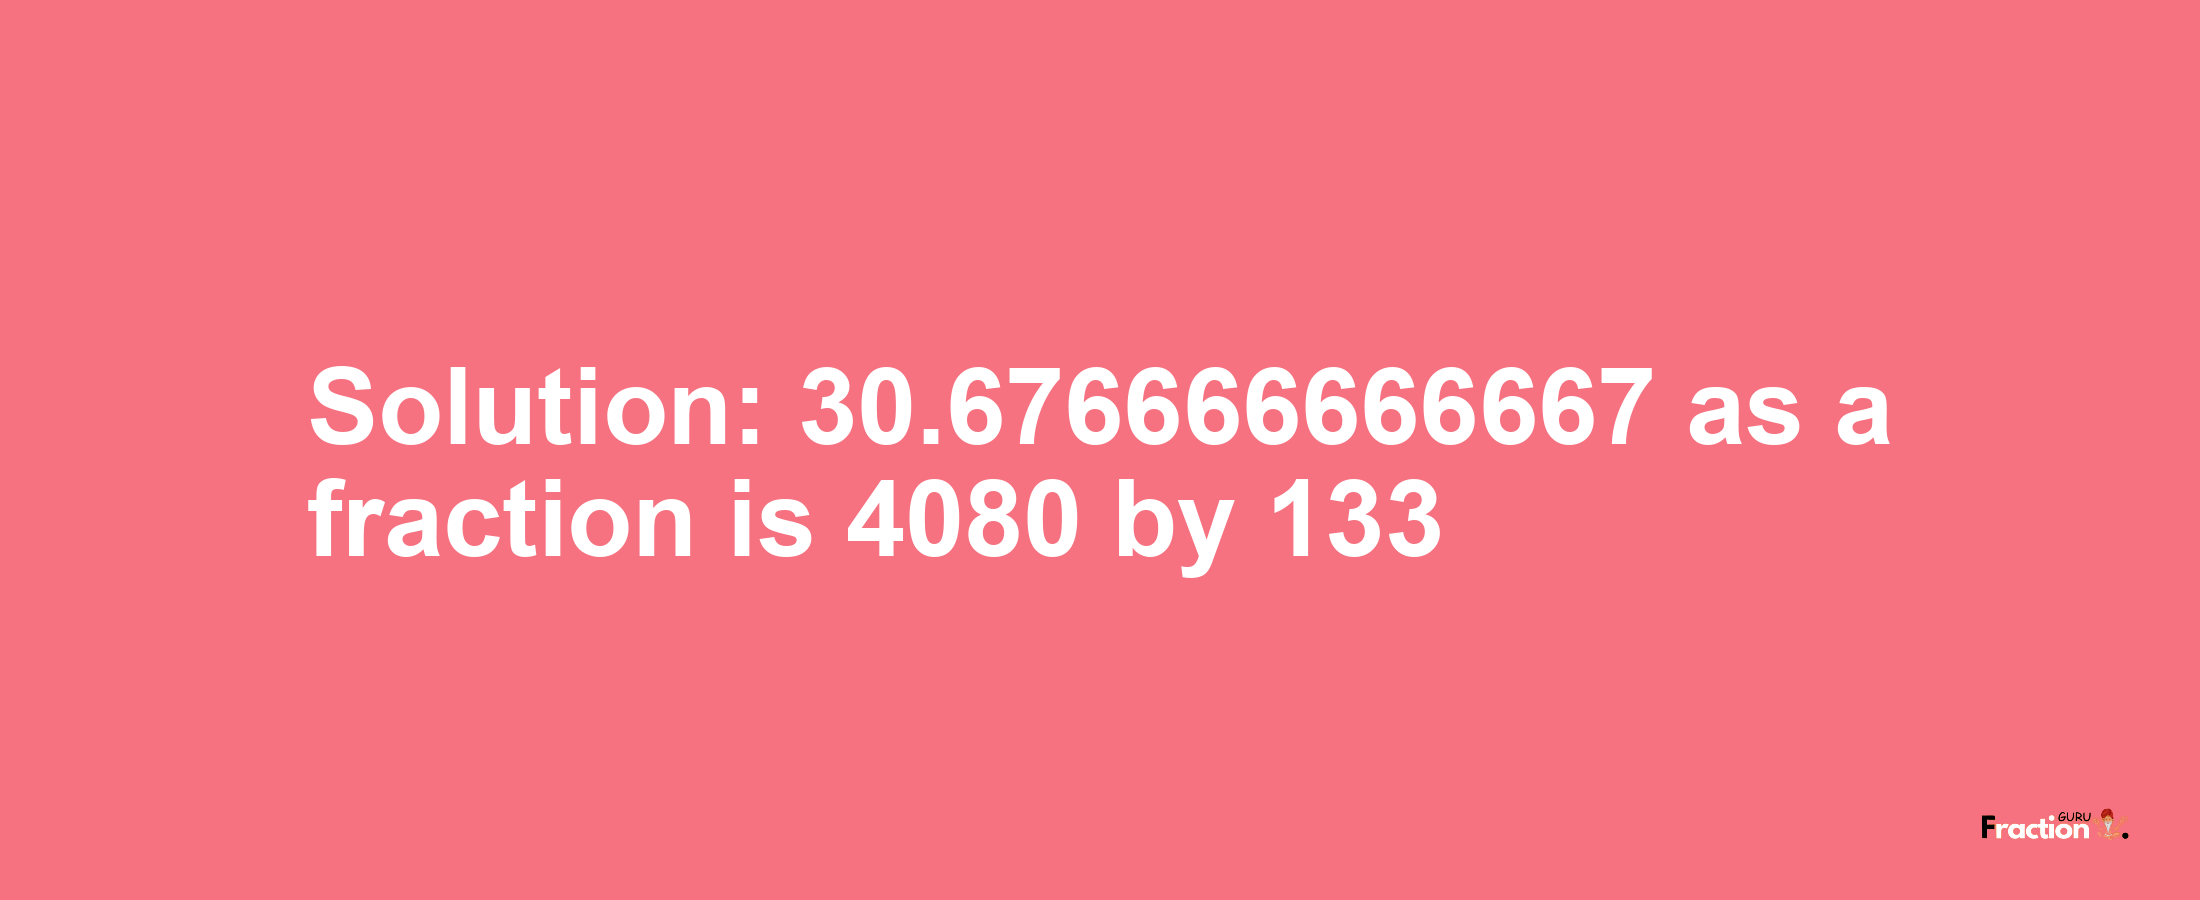 Solution:30.676666666667 as a fraction is 4080/133